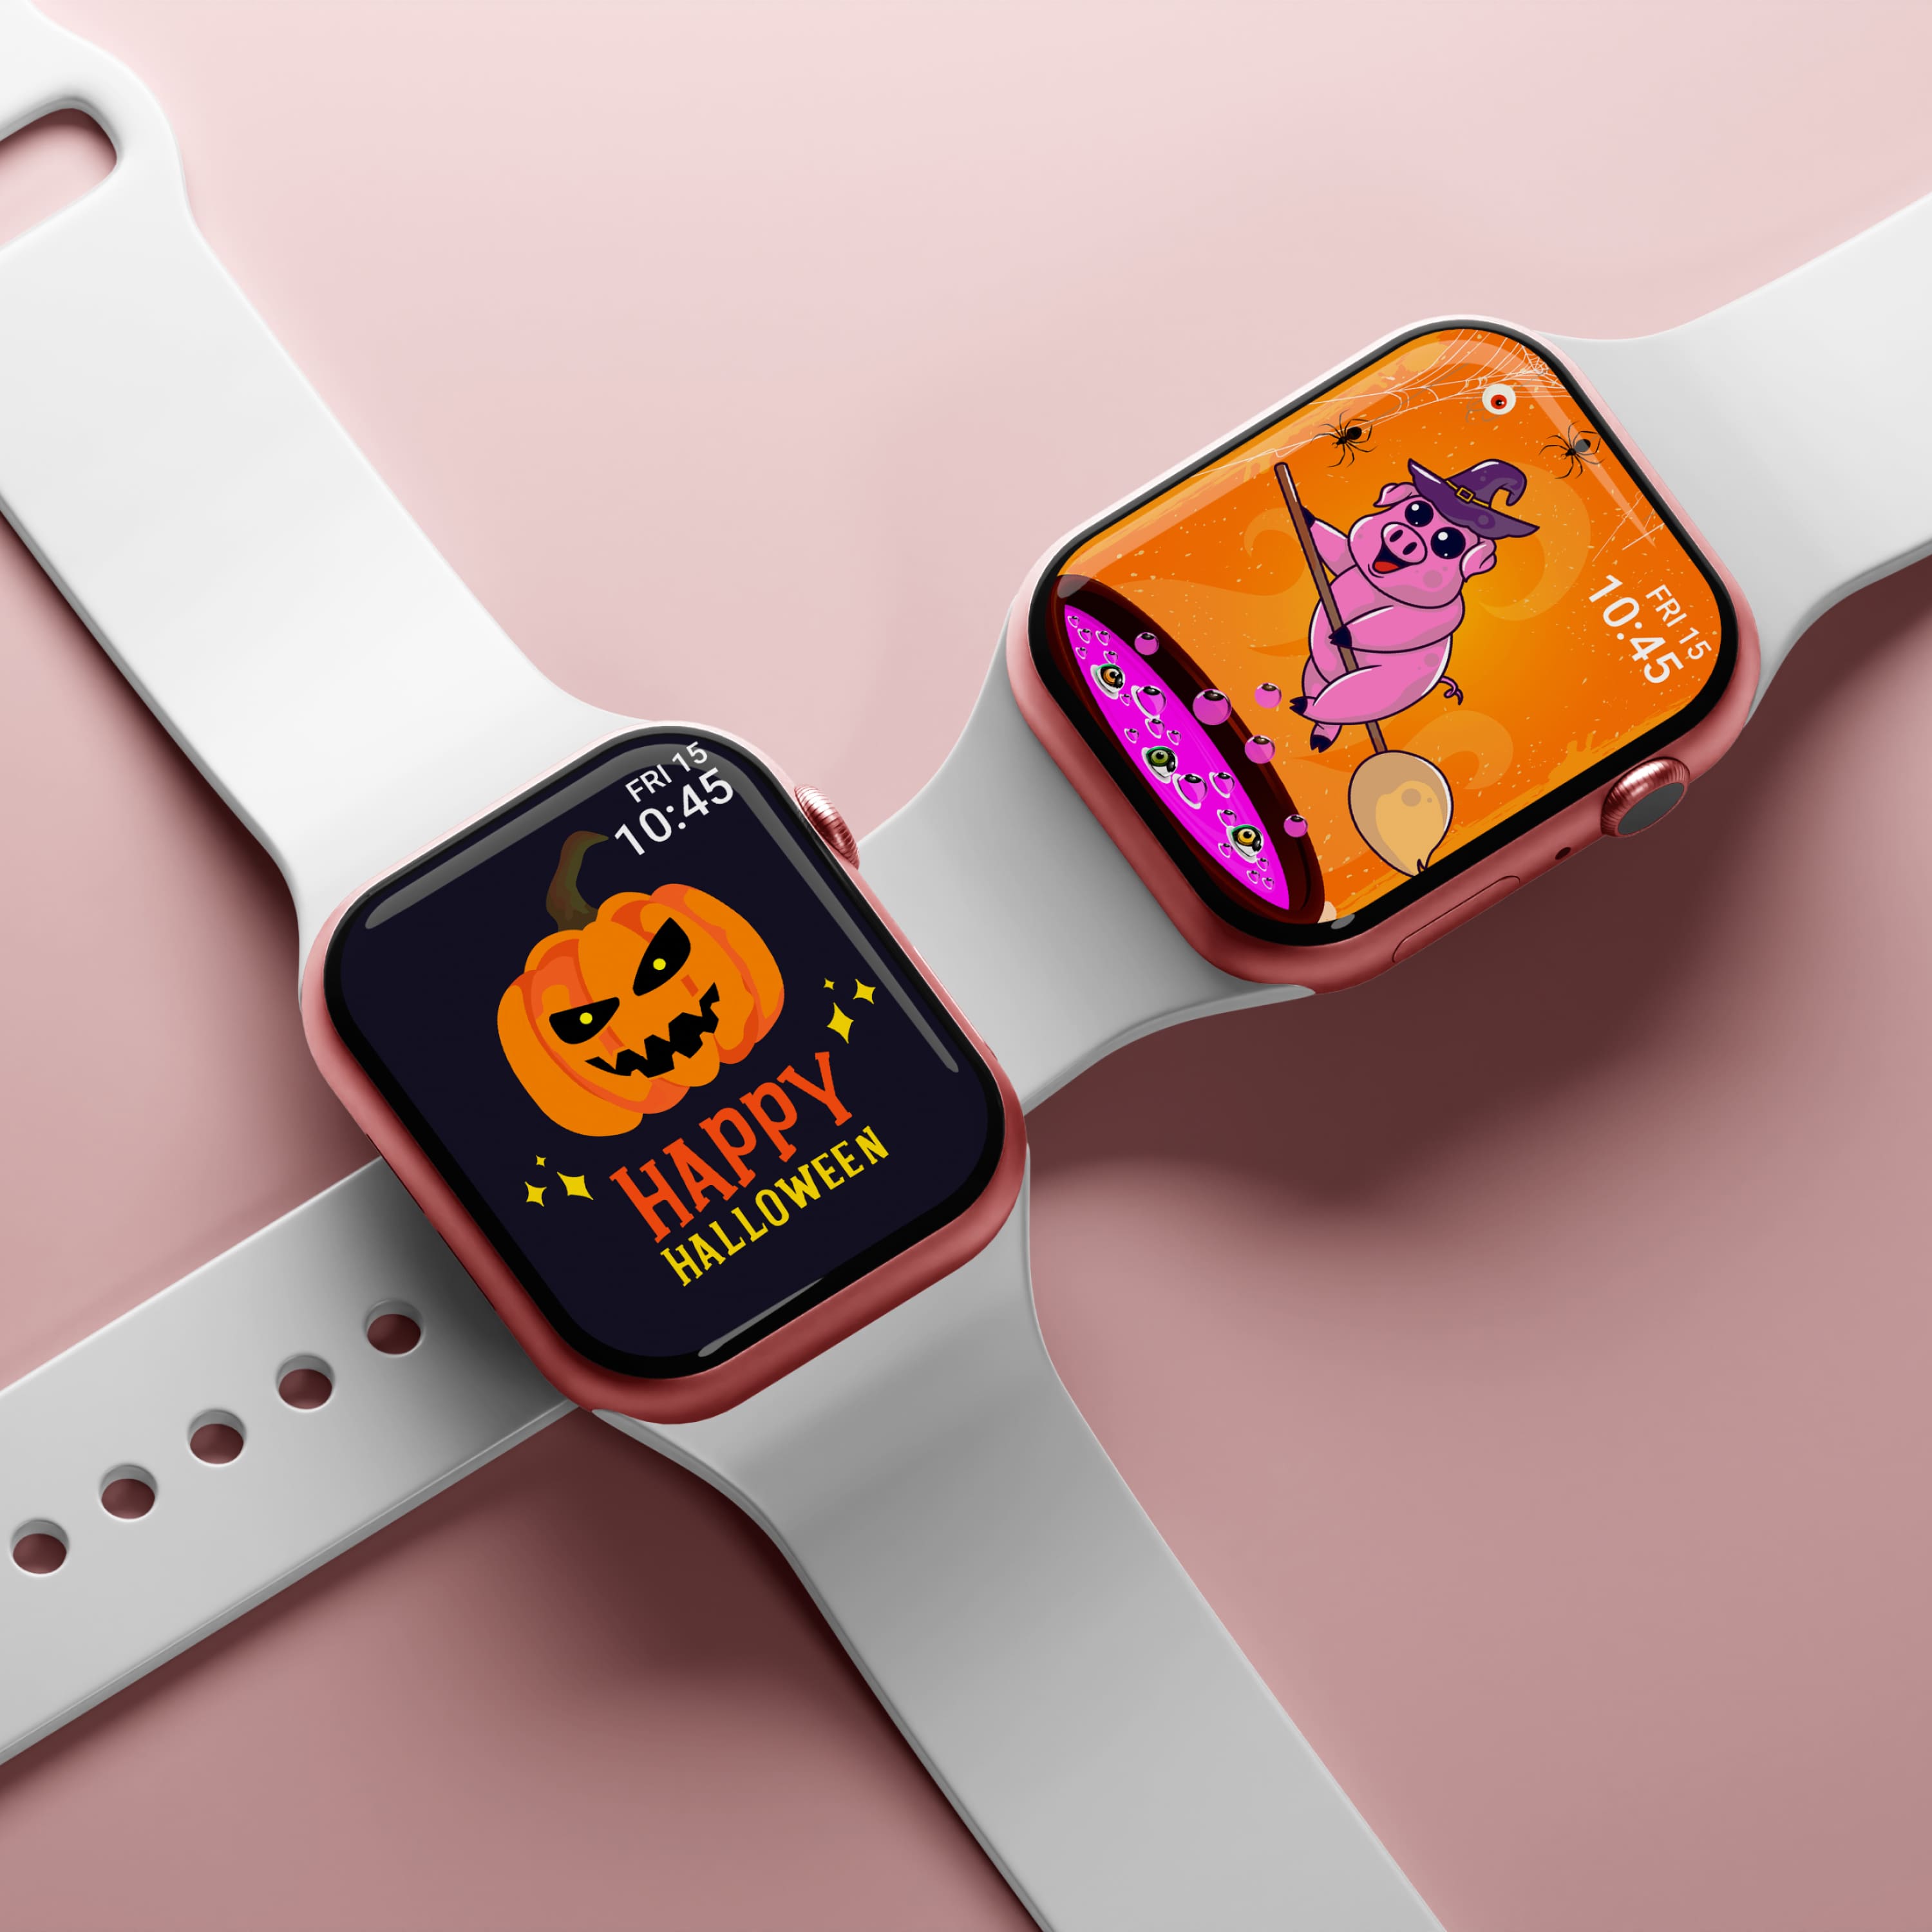 Two apple watches with halloween illustrations.